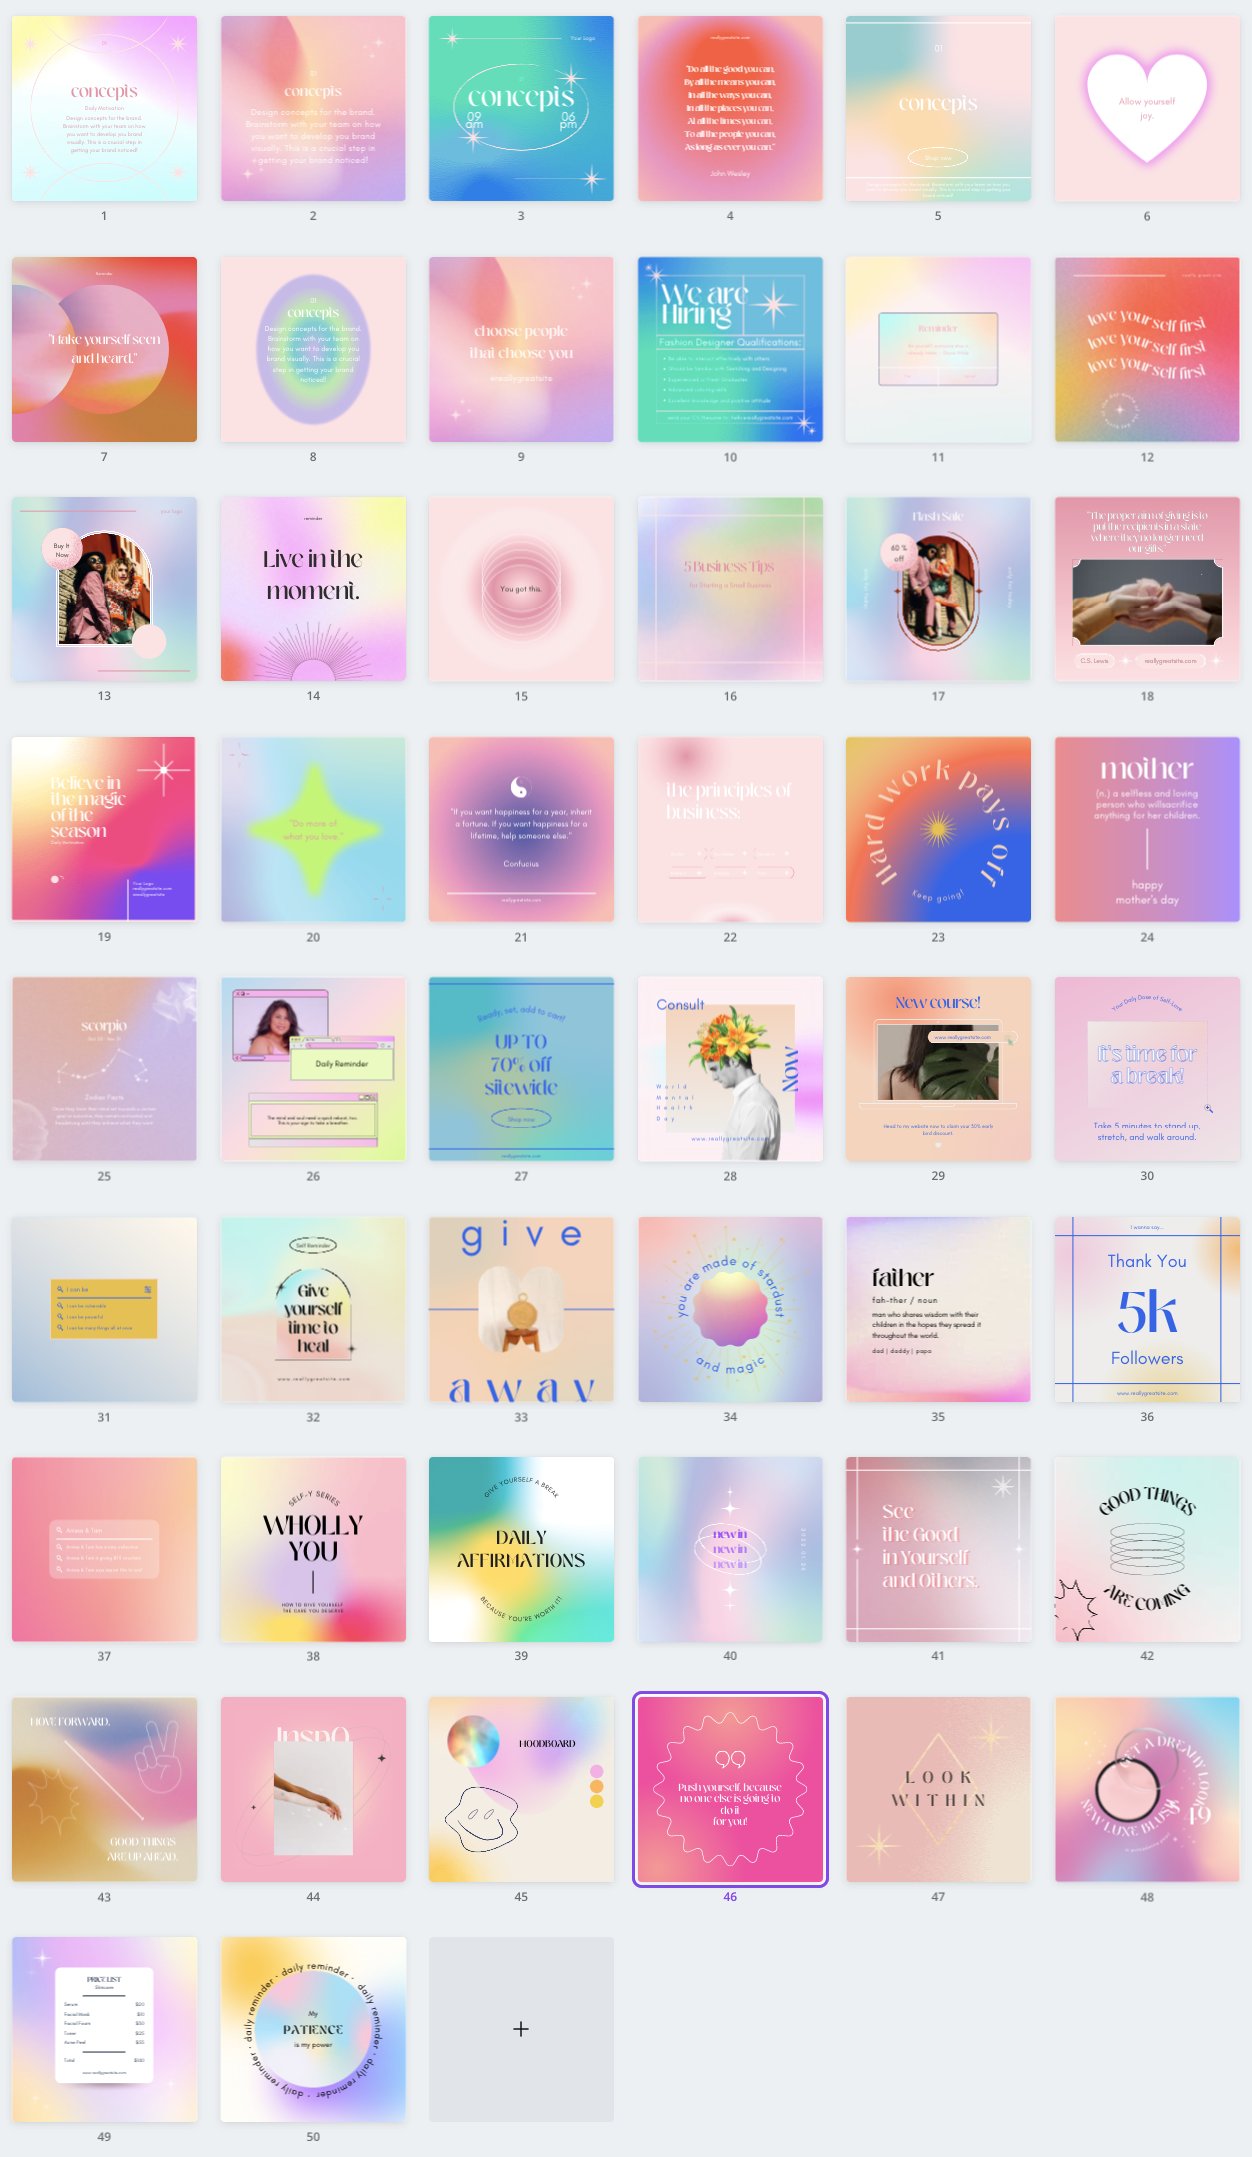 Gradient Instagram Feed Canva preview image.